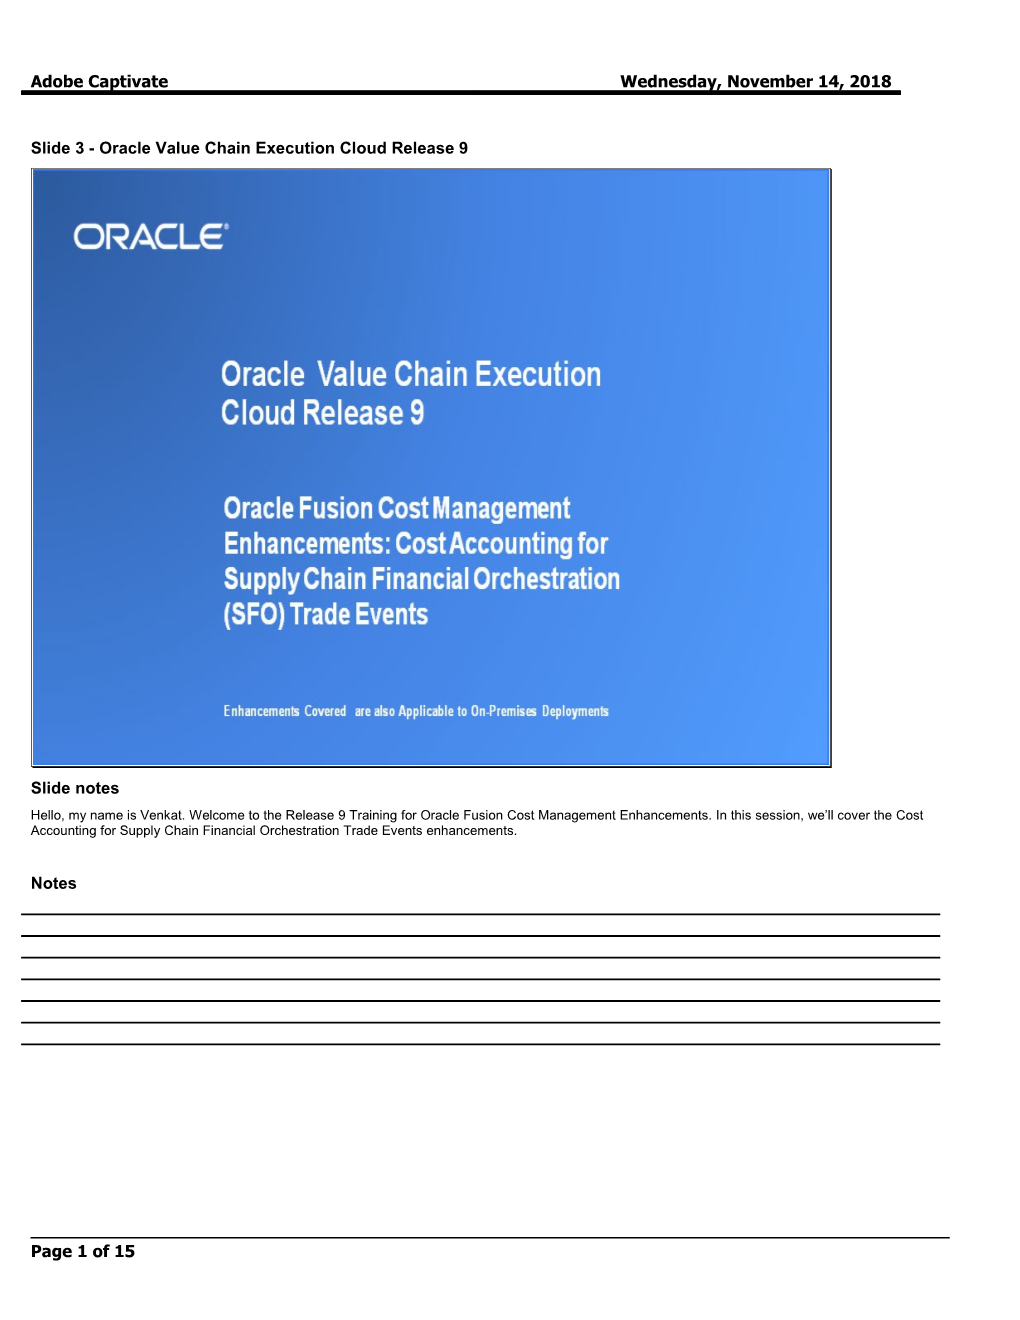 Slide 3 - Oracle Value Chain Execution Cloud Release 9